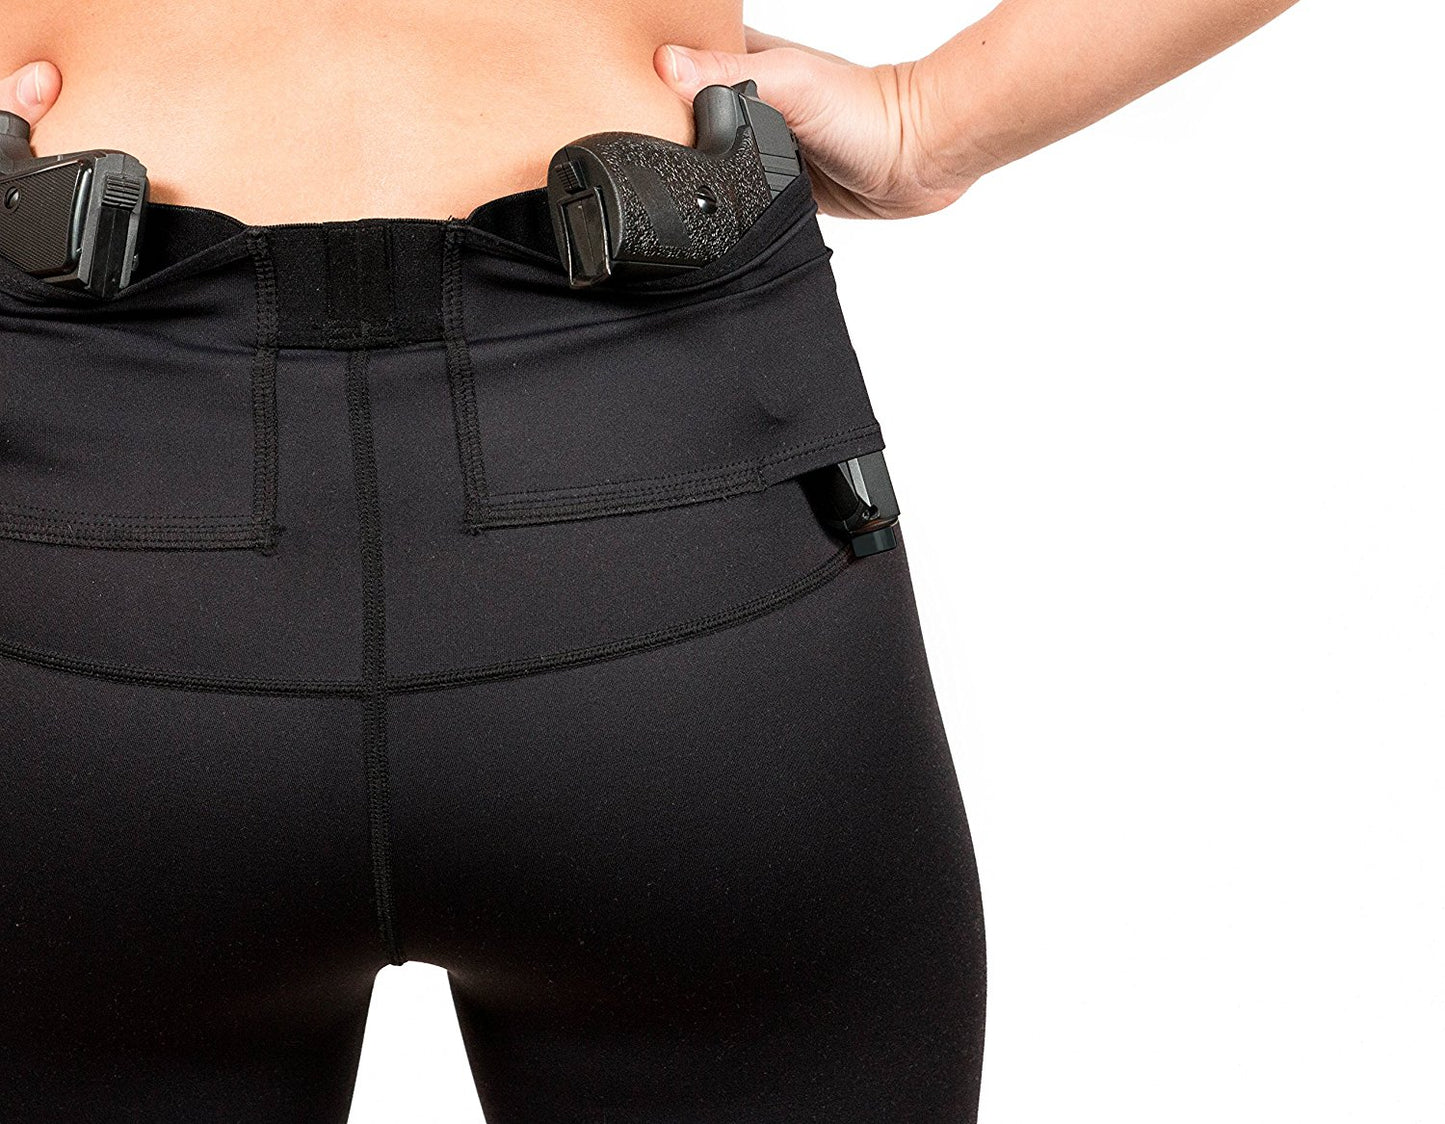  lilcreek Concealed Carry Leggings for Women Gun Holster,Conceal  Carry for Women Shorts,Undercover Concealment Yoga Pants Gray : Sports &  Outdoors